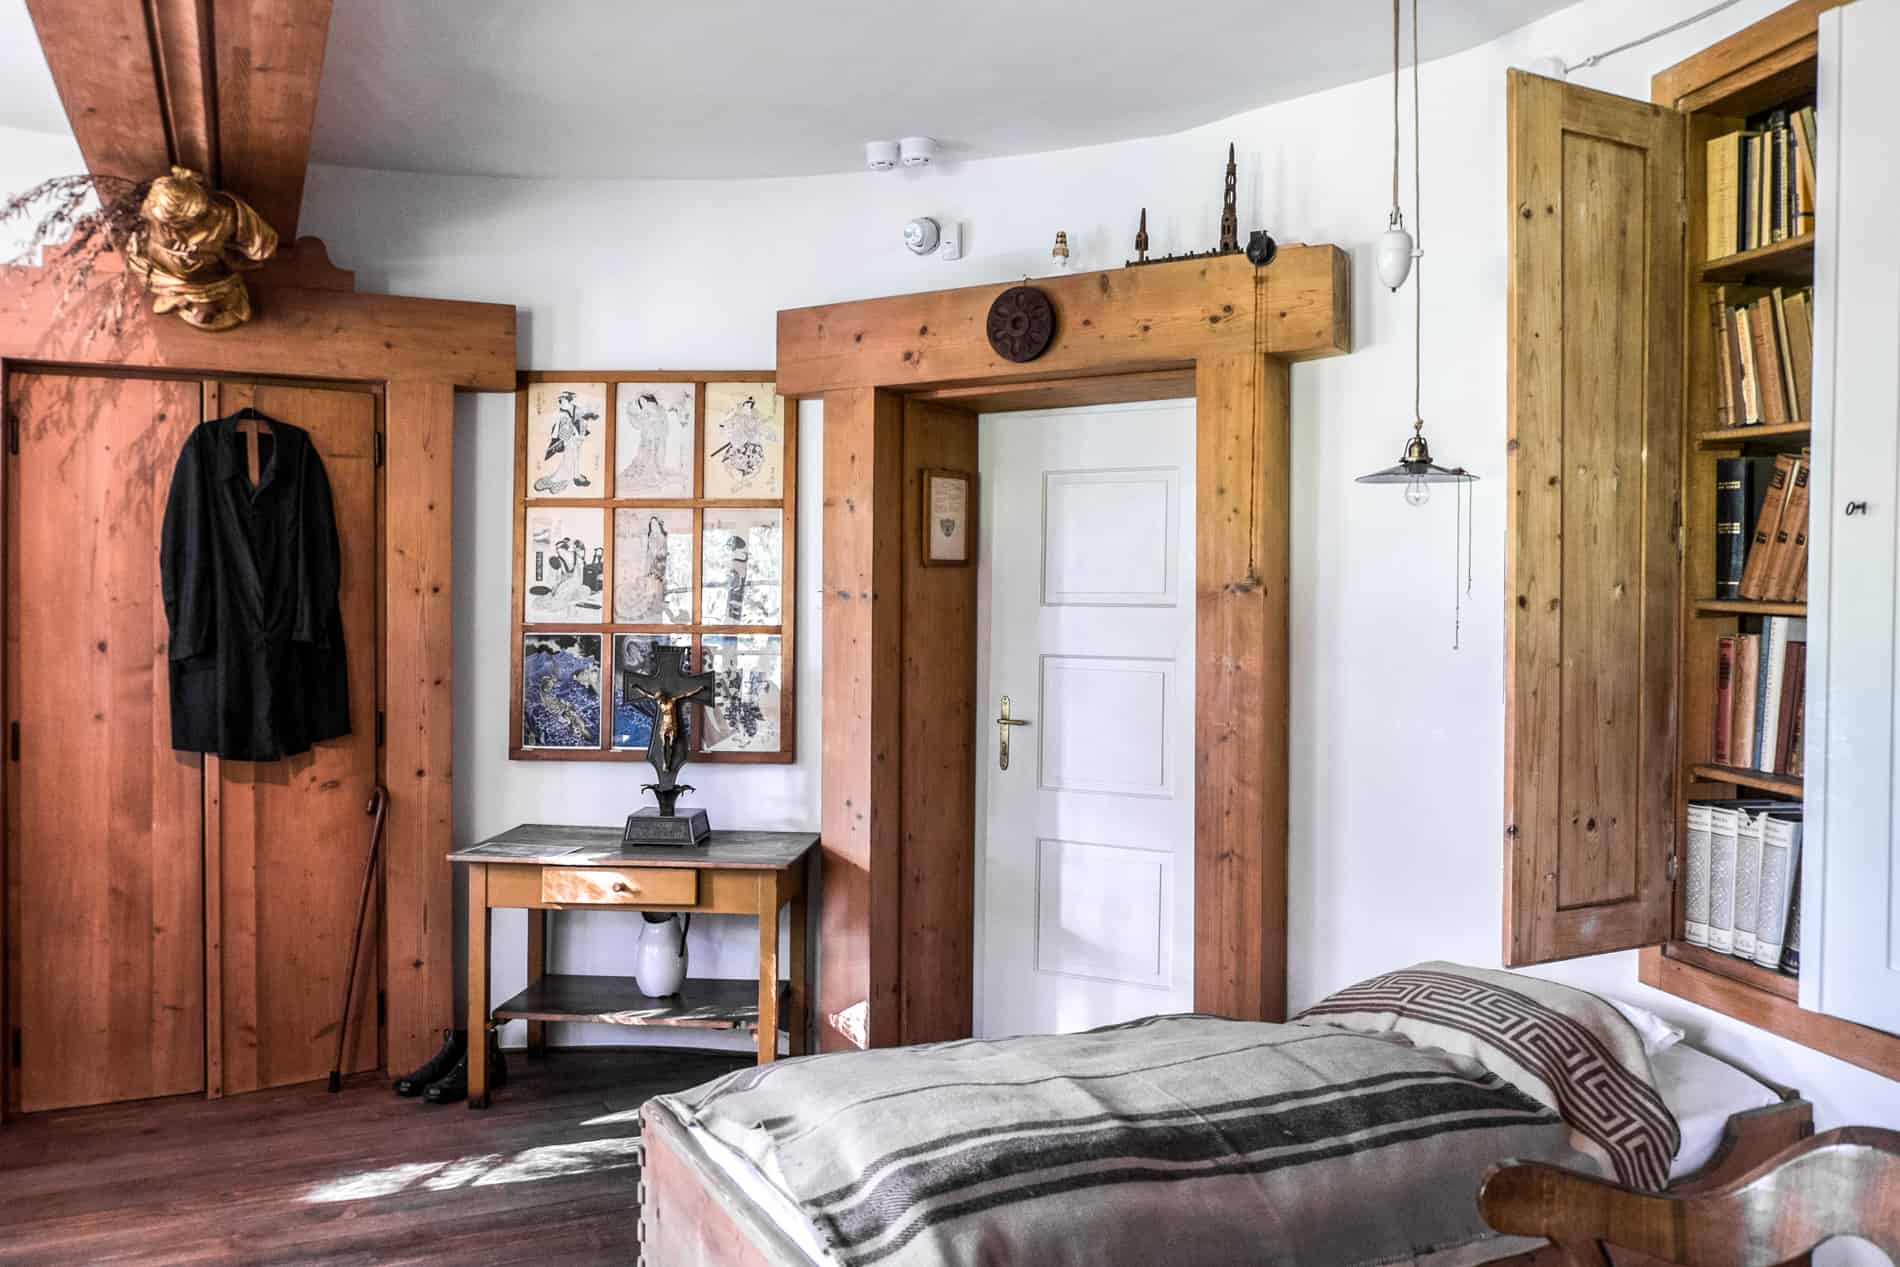 The bedroom with wooden panelled details and small bed inside Plecnik's house in Ljubljana. 